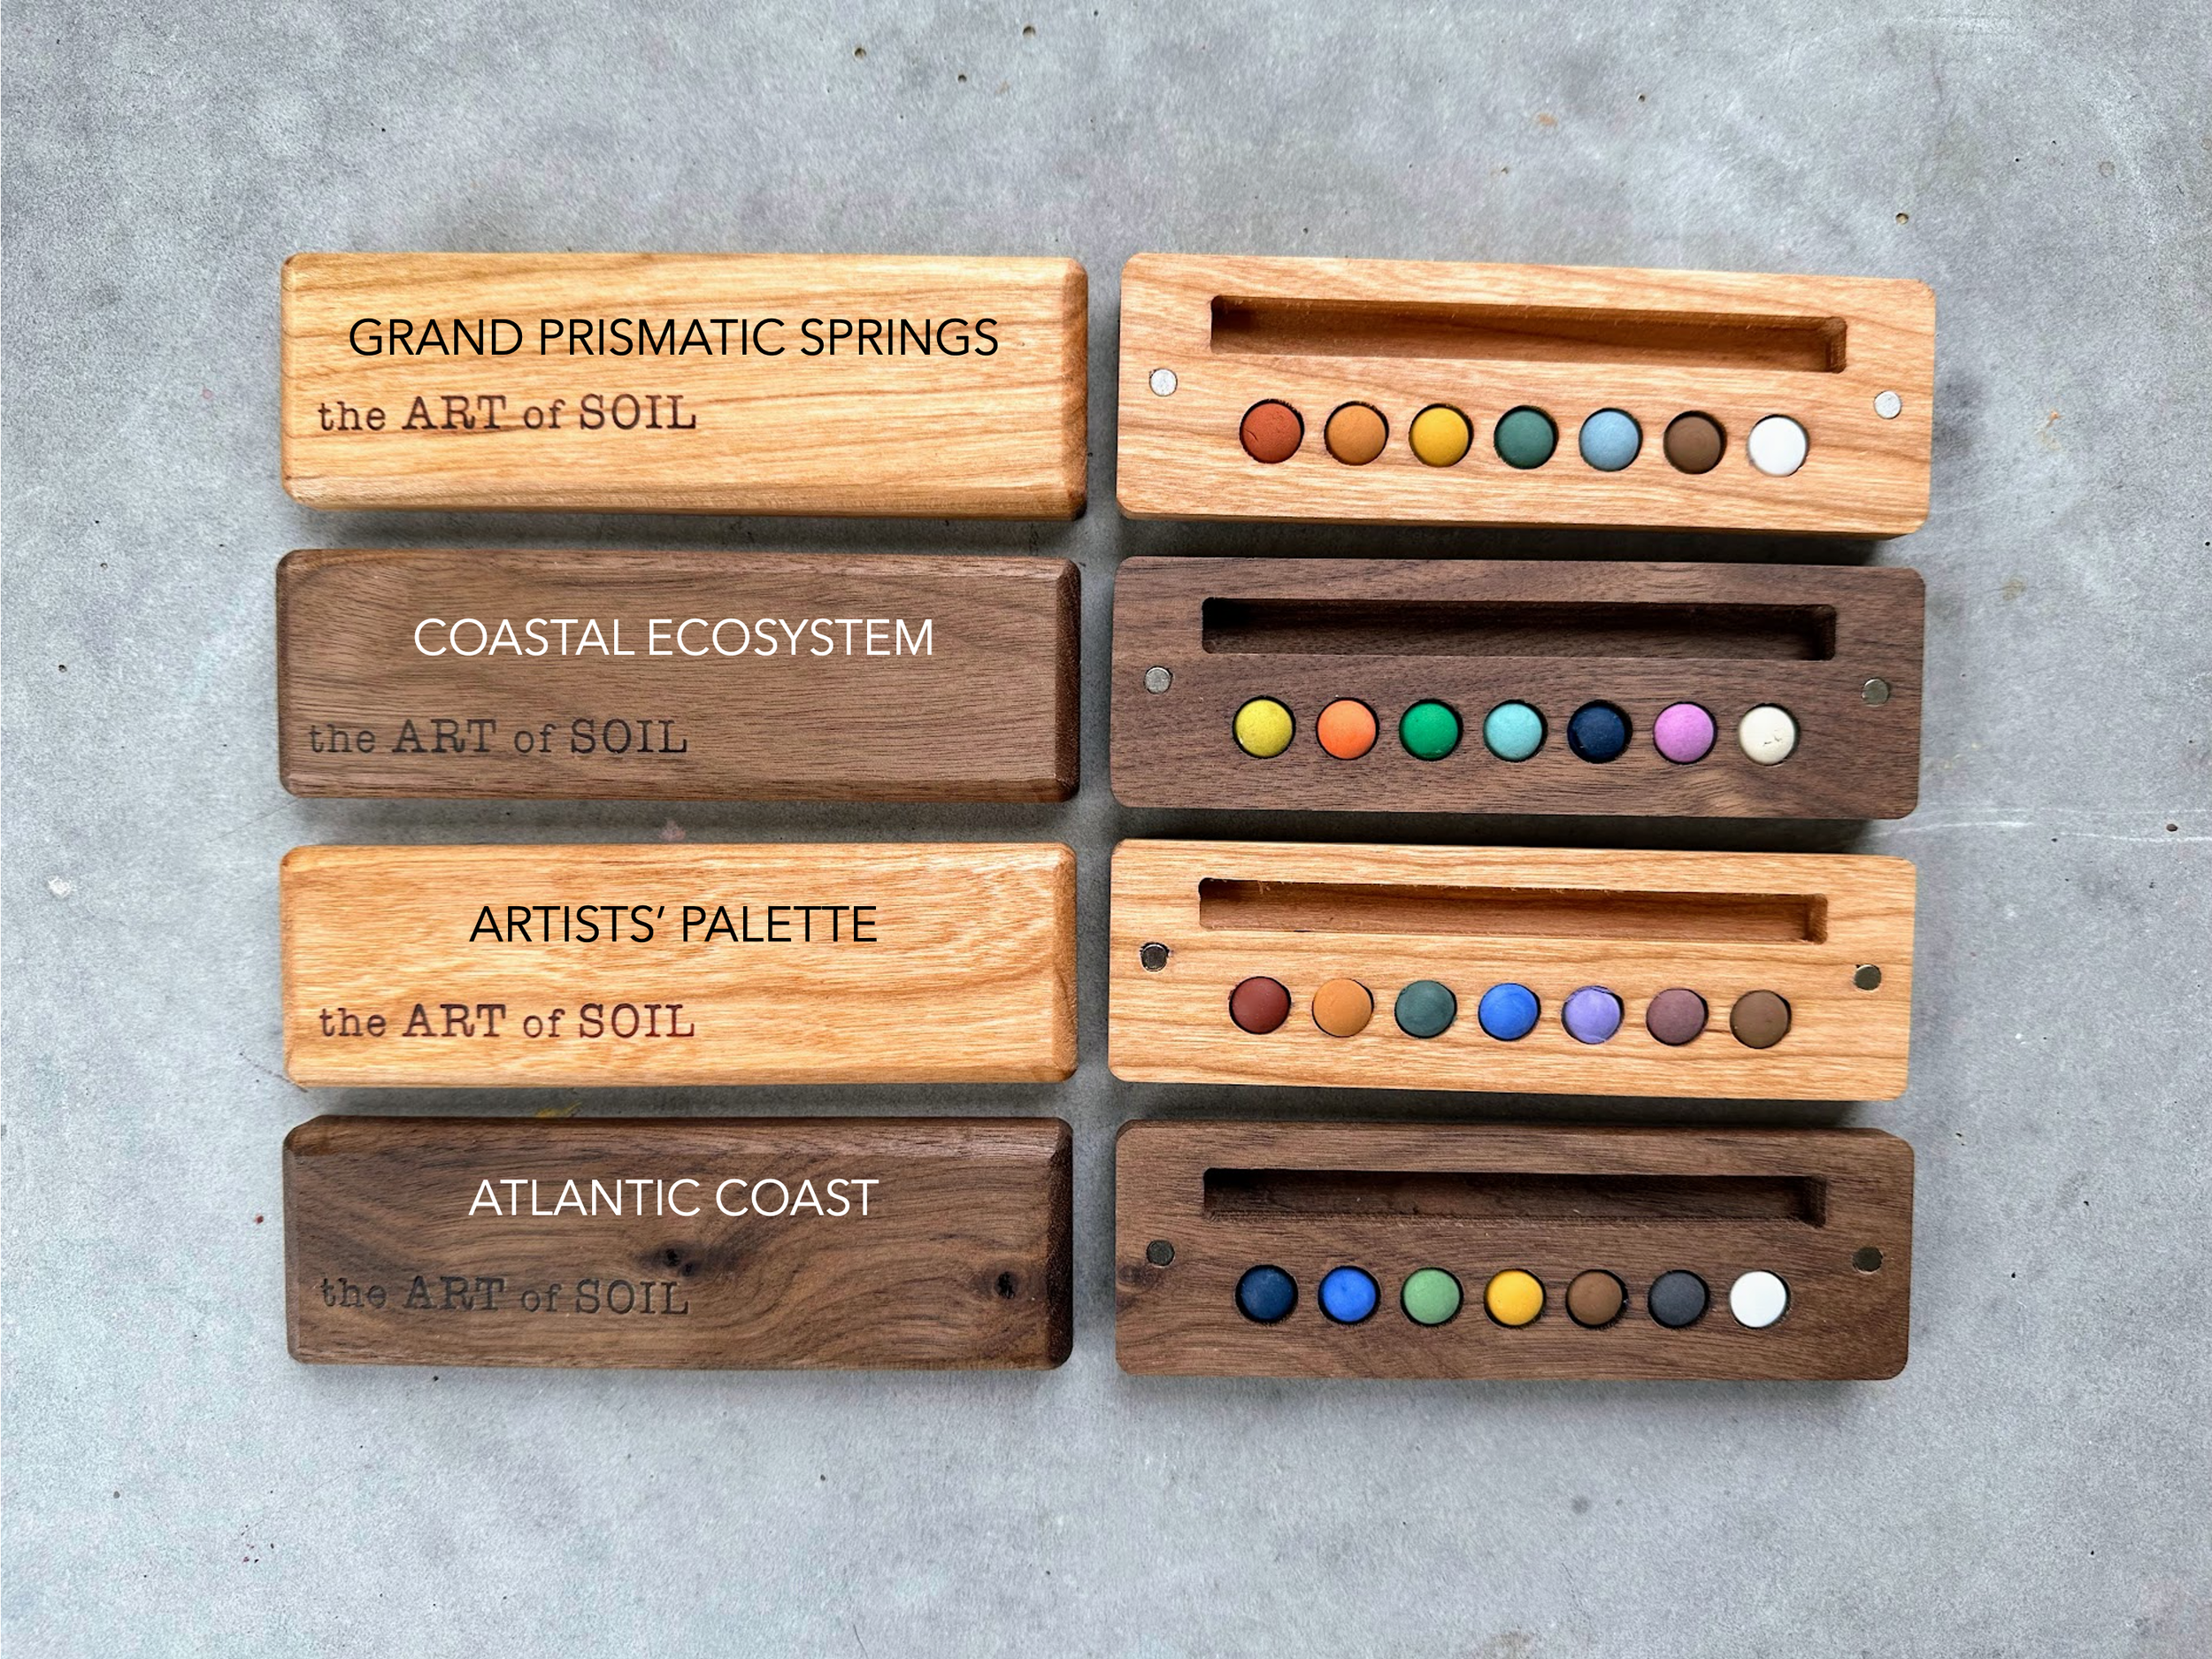 New Stained Artist Painting Sketch Box With Wooden Palette 